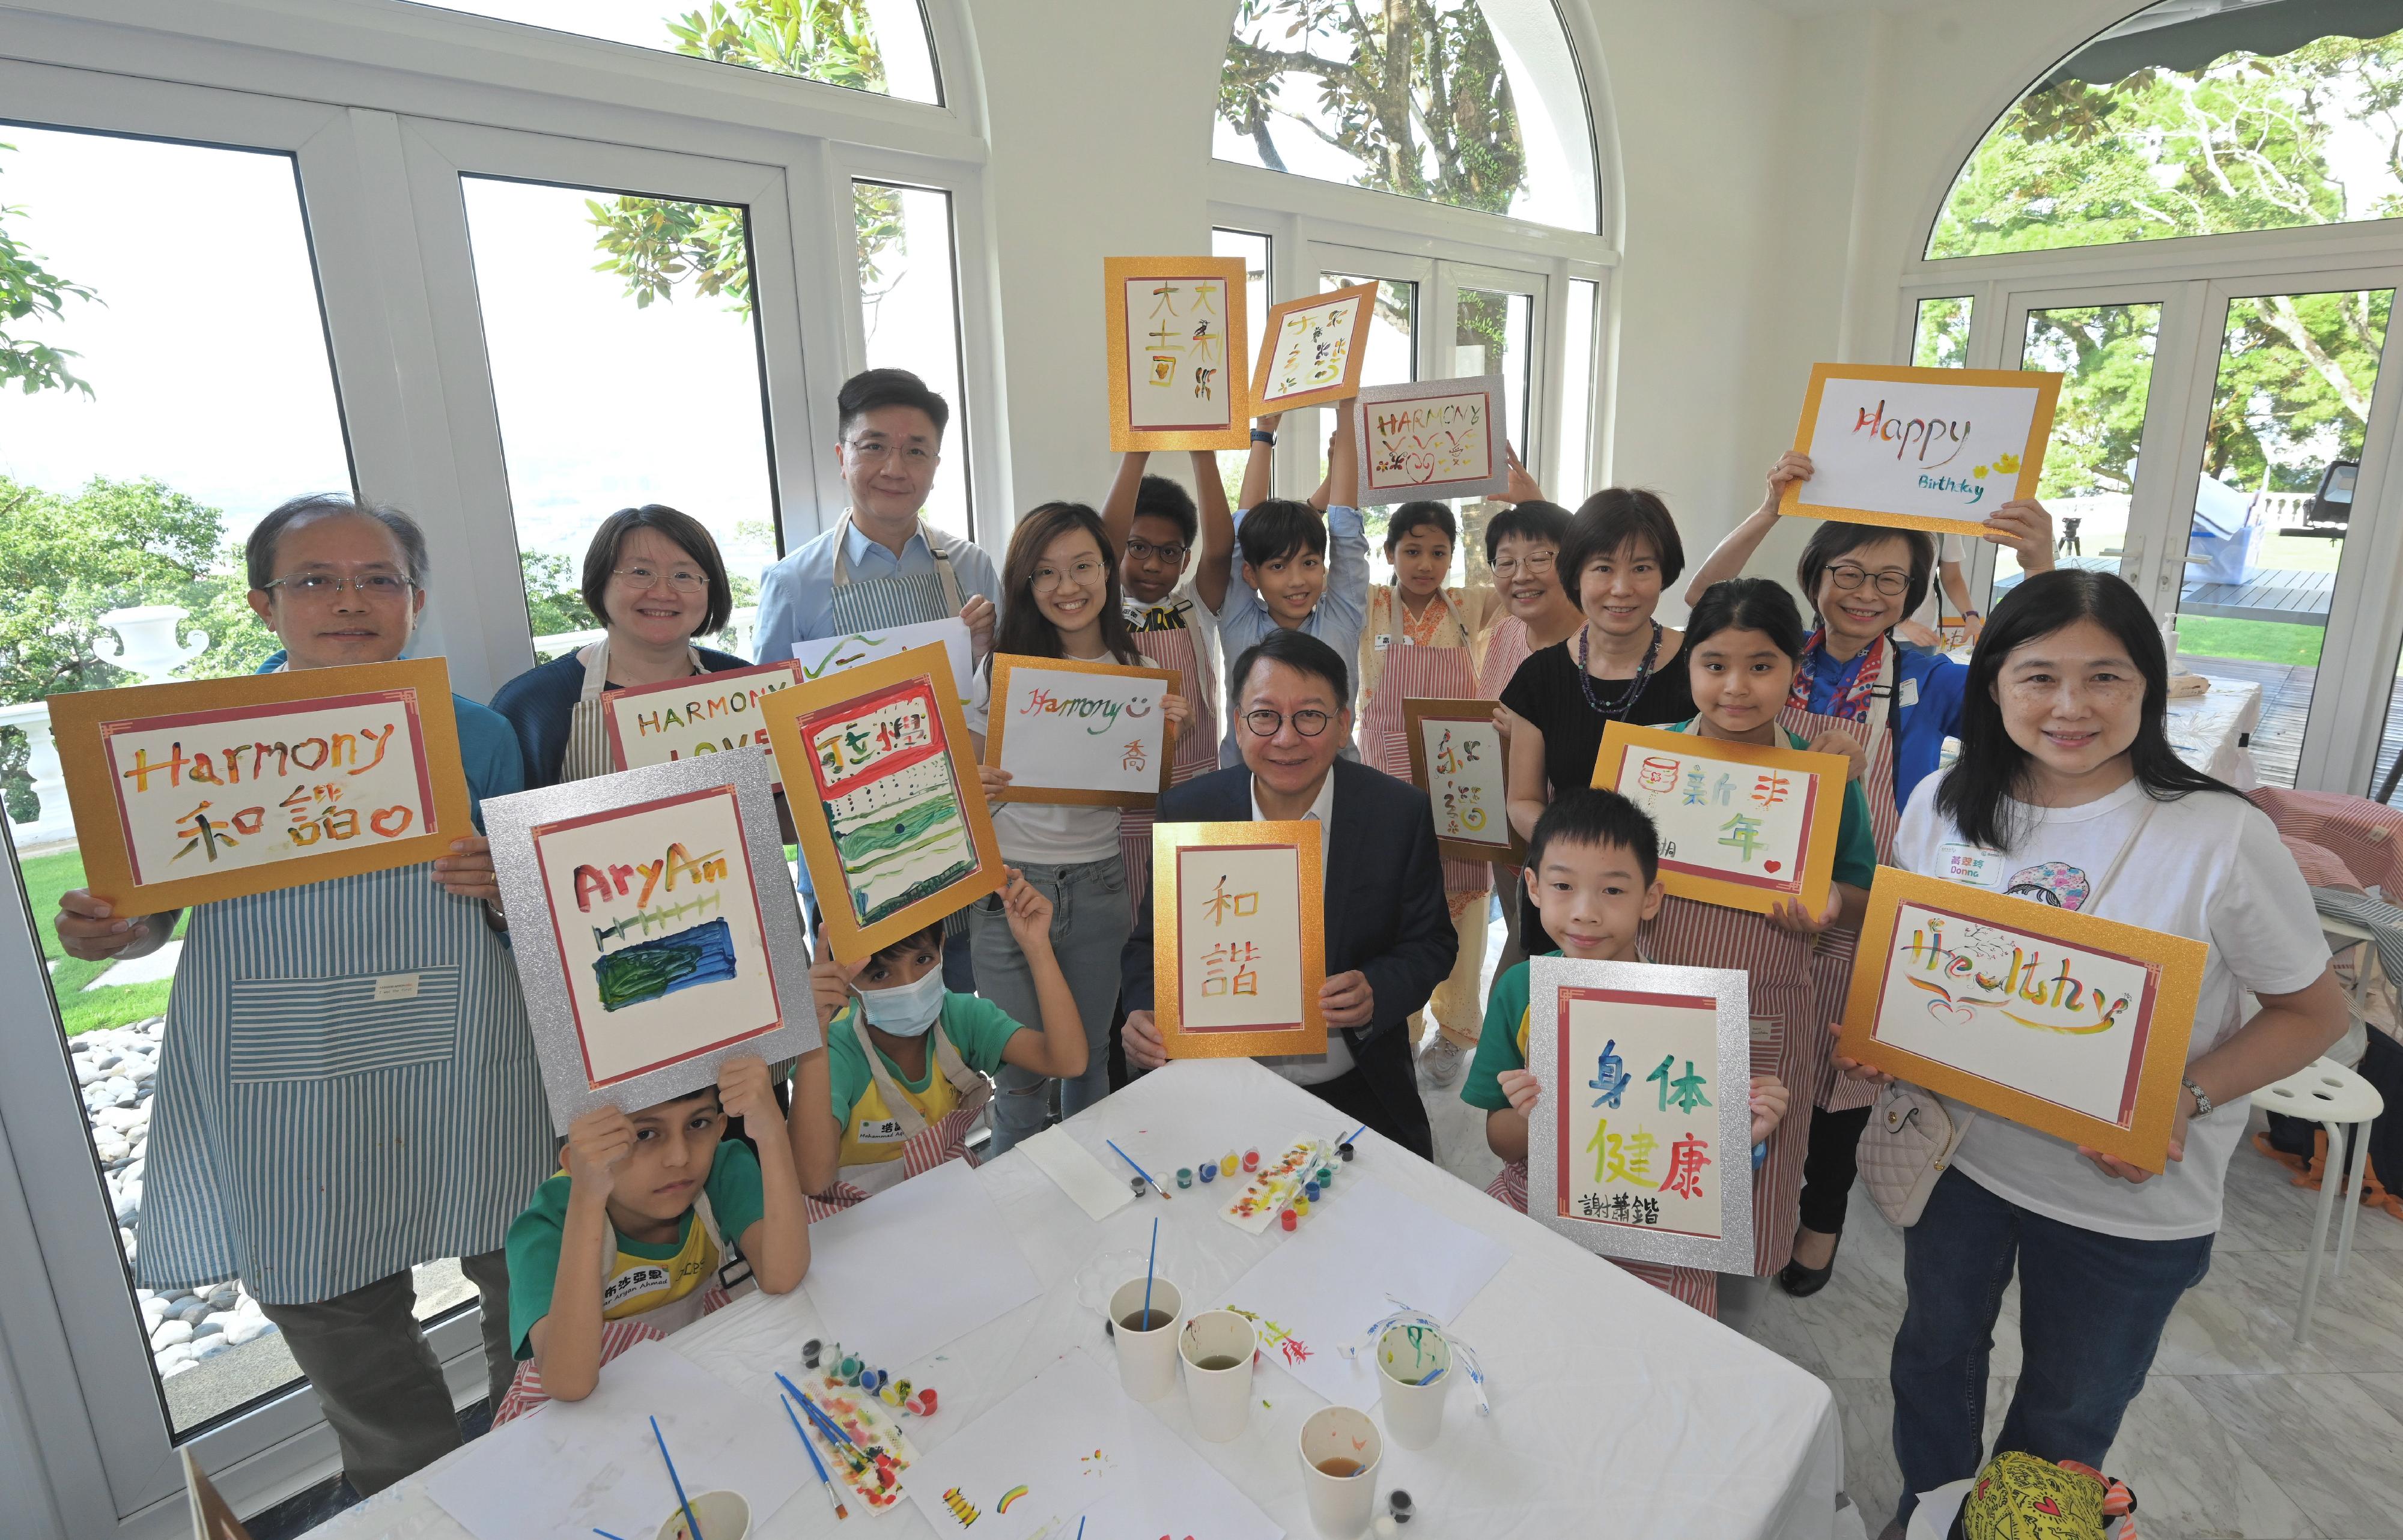 The Chief Secretary for Administration and Chairperson of the Commission on Children (CoC), Mr Chan Kwok-ki, hosted about 40 primary school students at Victoria House today (September 23) at the "Walk with Kids" stakeholder engagement event of the CoC on the theme of harmony and cultural inclusion. They interacted with one another and celebrated the Mid-Autumn Festival together. Photo shows Mr Chan (front row, centre) and students showing their rainbow calligraphy works.